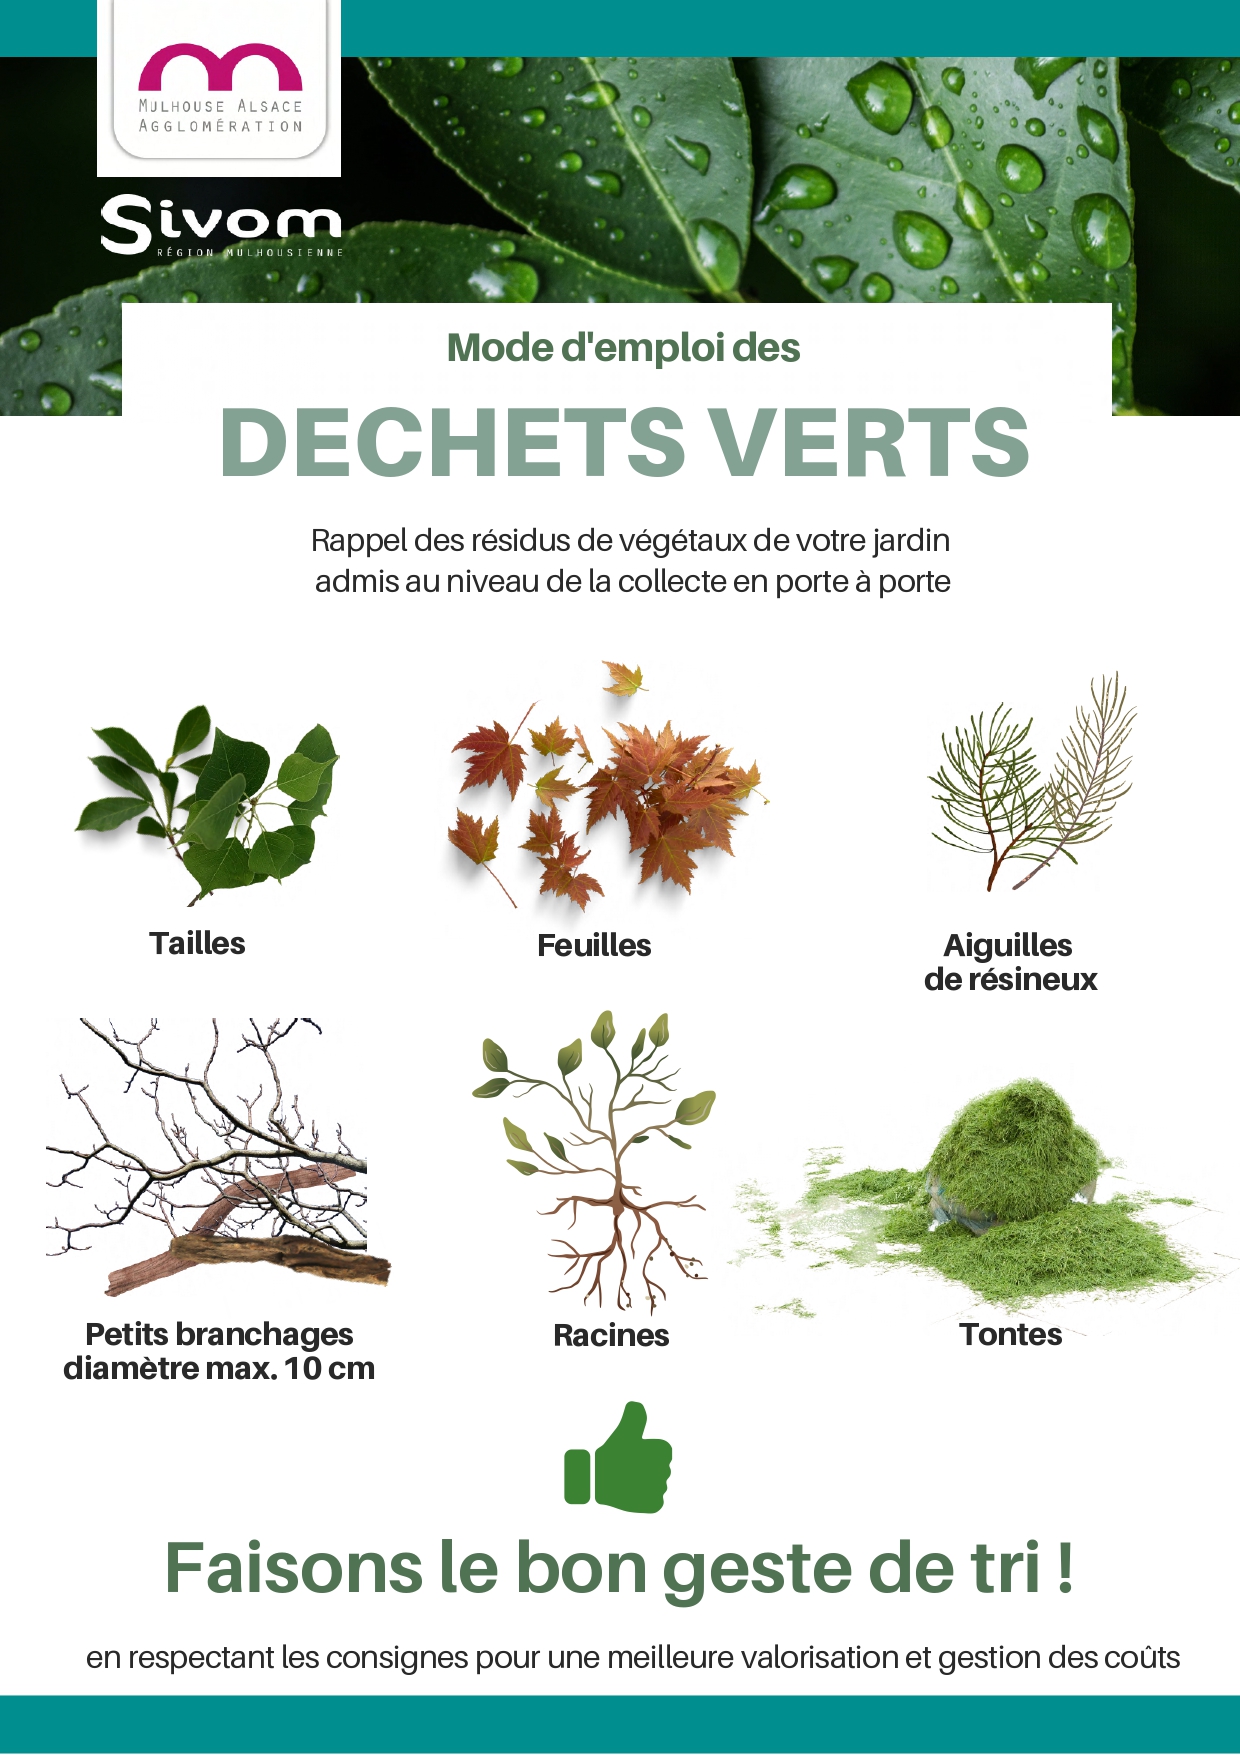 Flyer déchets Verts_pages-to-jpg-0001.jpg